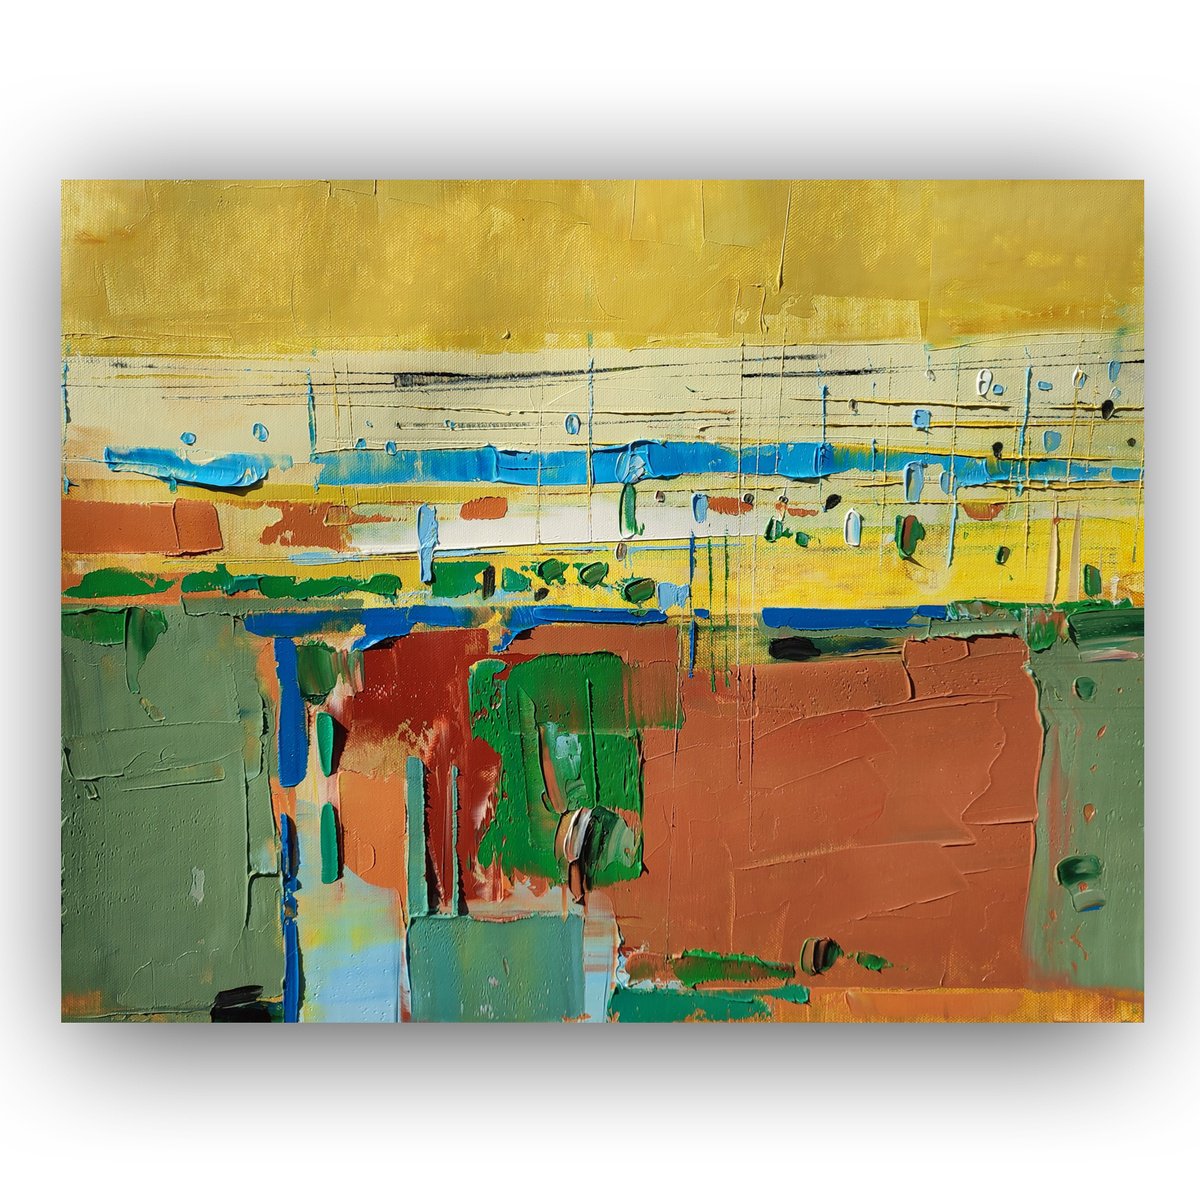 Abstract oil painting City lines 12. Size 15,7/19,7 inches, 40/50cm, stretched by Kariko ono